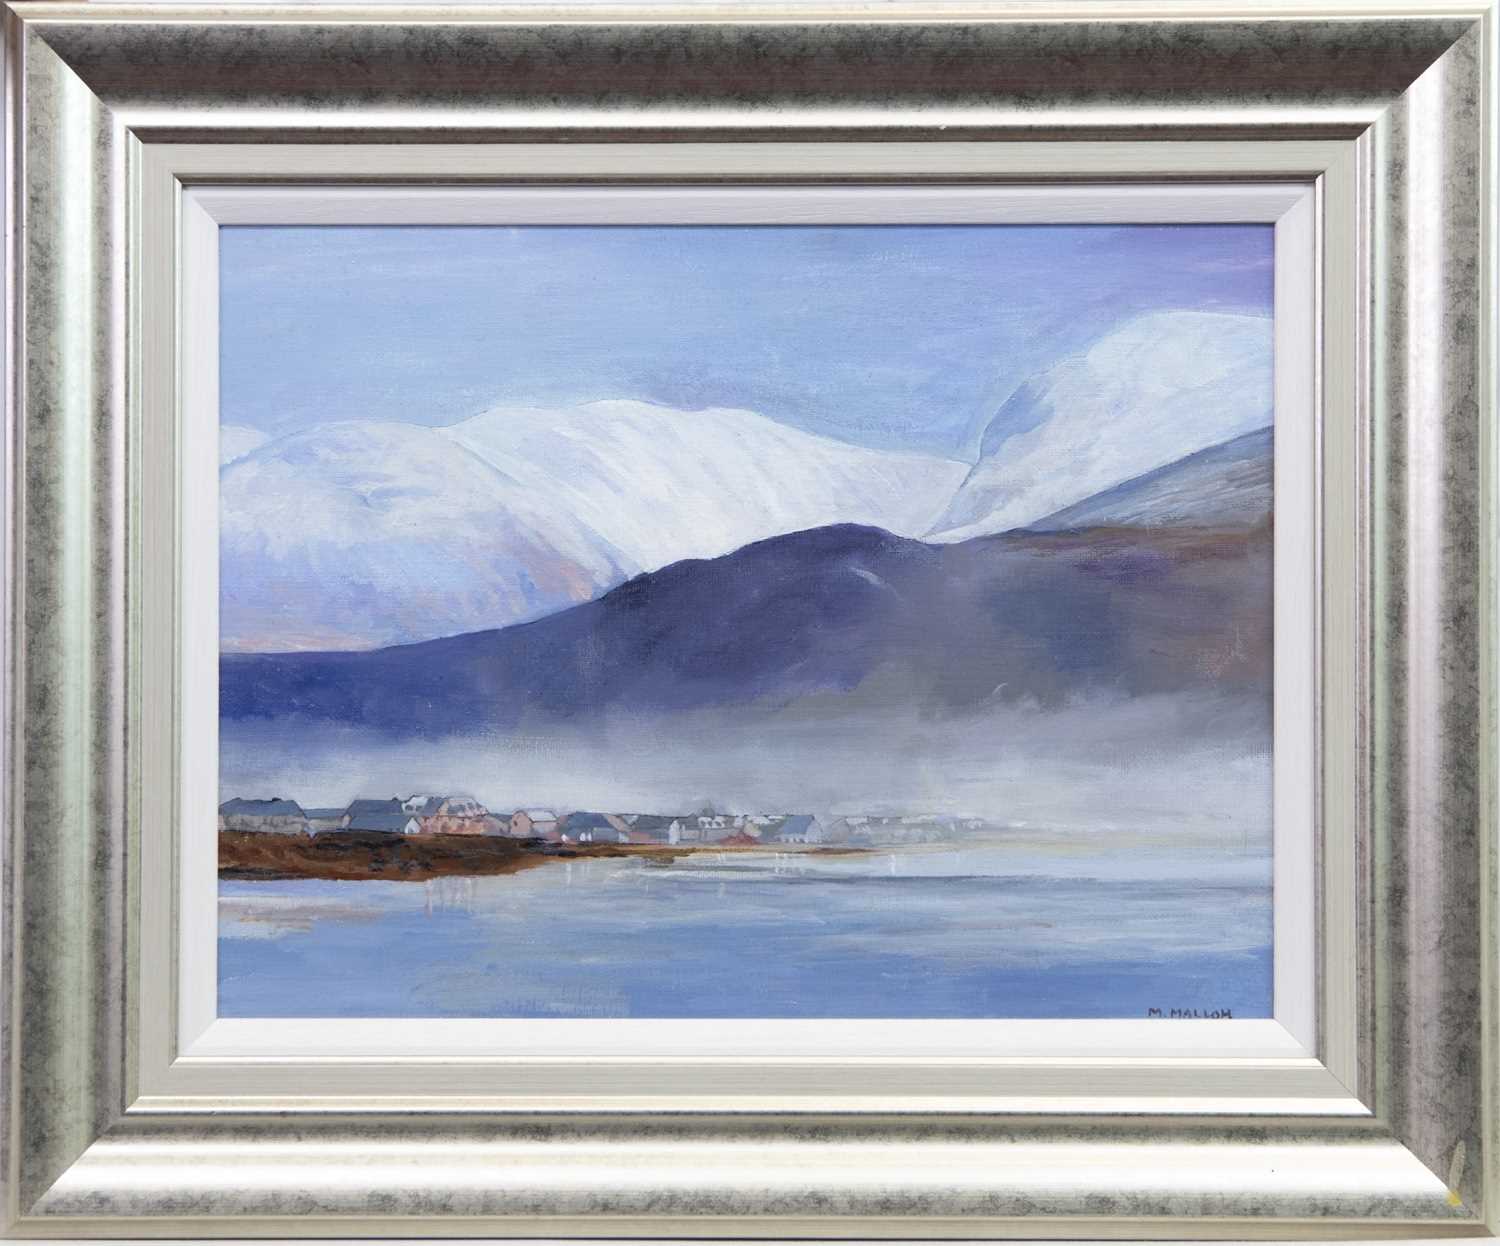 Lot 21 - CAOL AND BEN NEVIS, AN OIL BY MARGARET MALLOCH